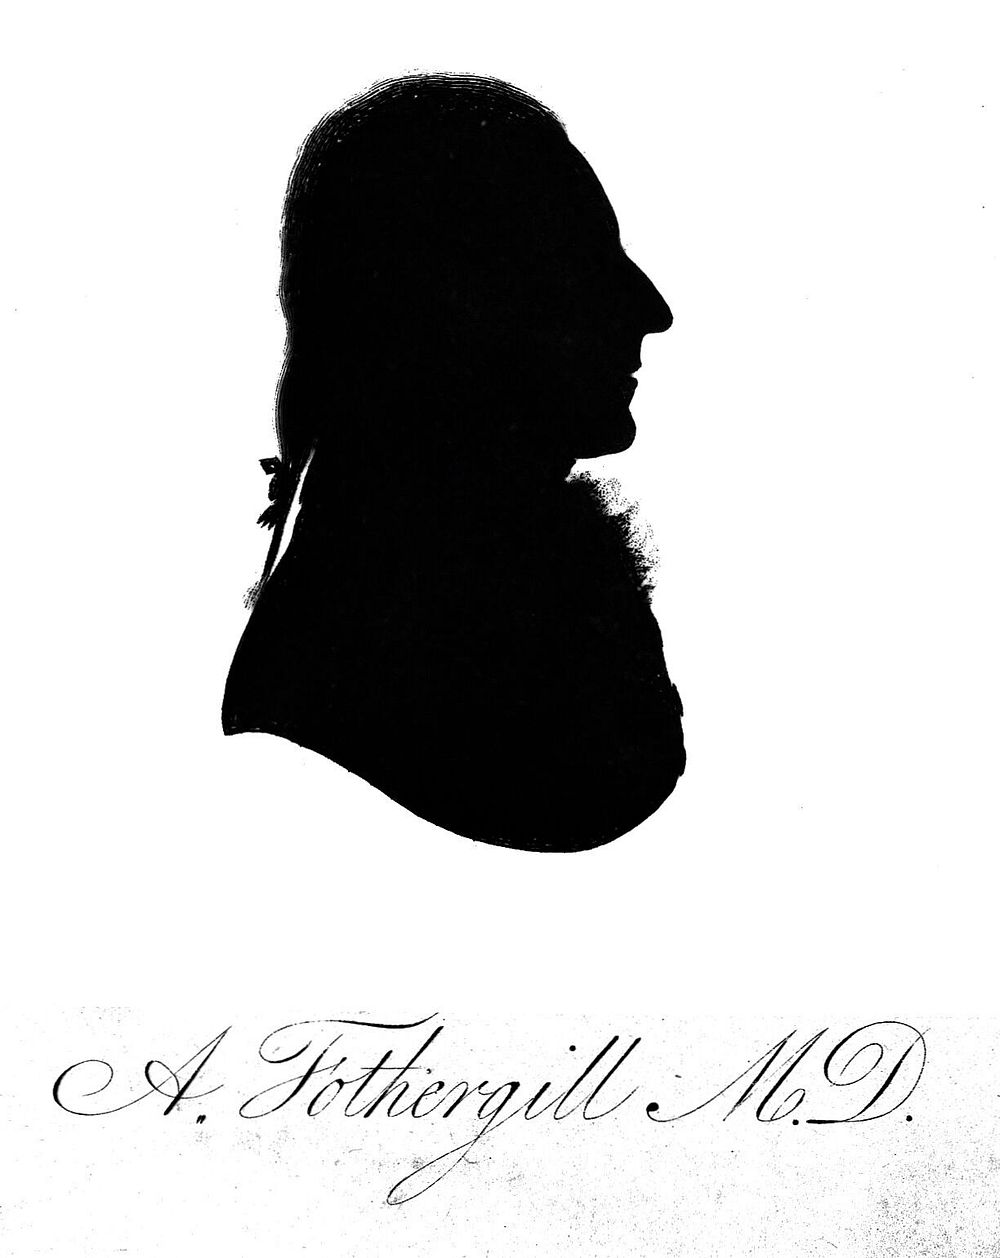 Anthony Fothergill. Aquatint silhouette, 1801.